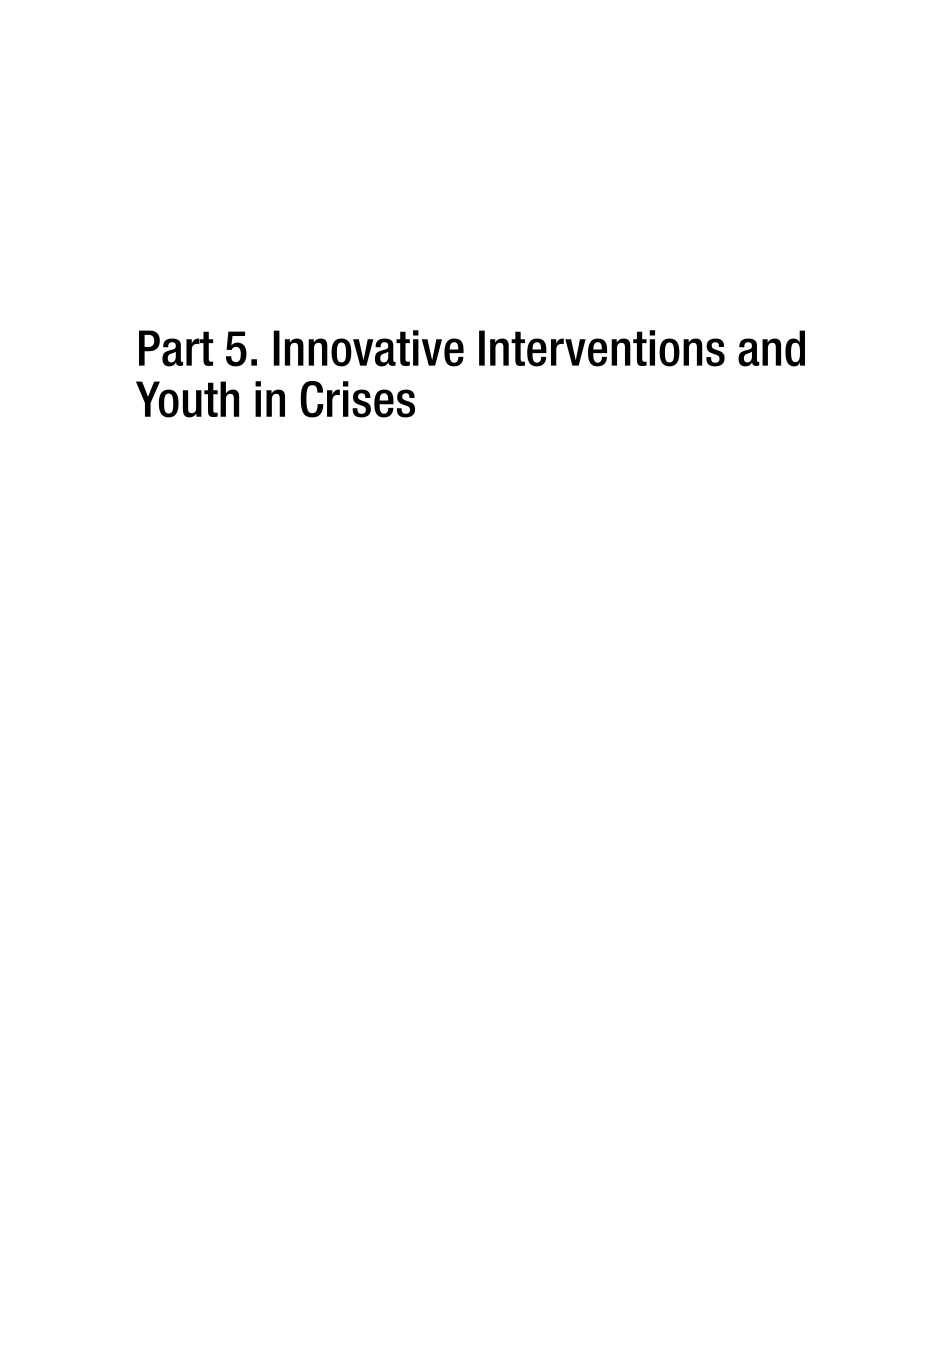 Globalizing the Streets: Cross-Cultural Perspectives on Youth, Social Control, and Empowerment page 233